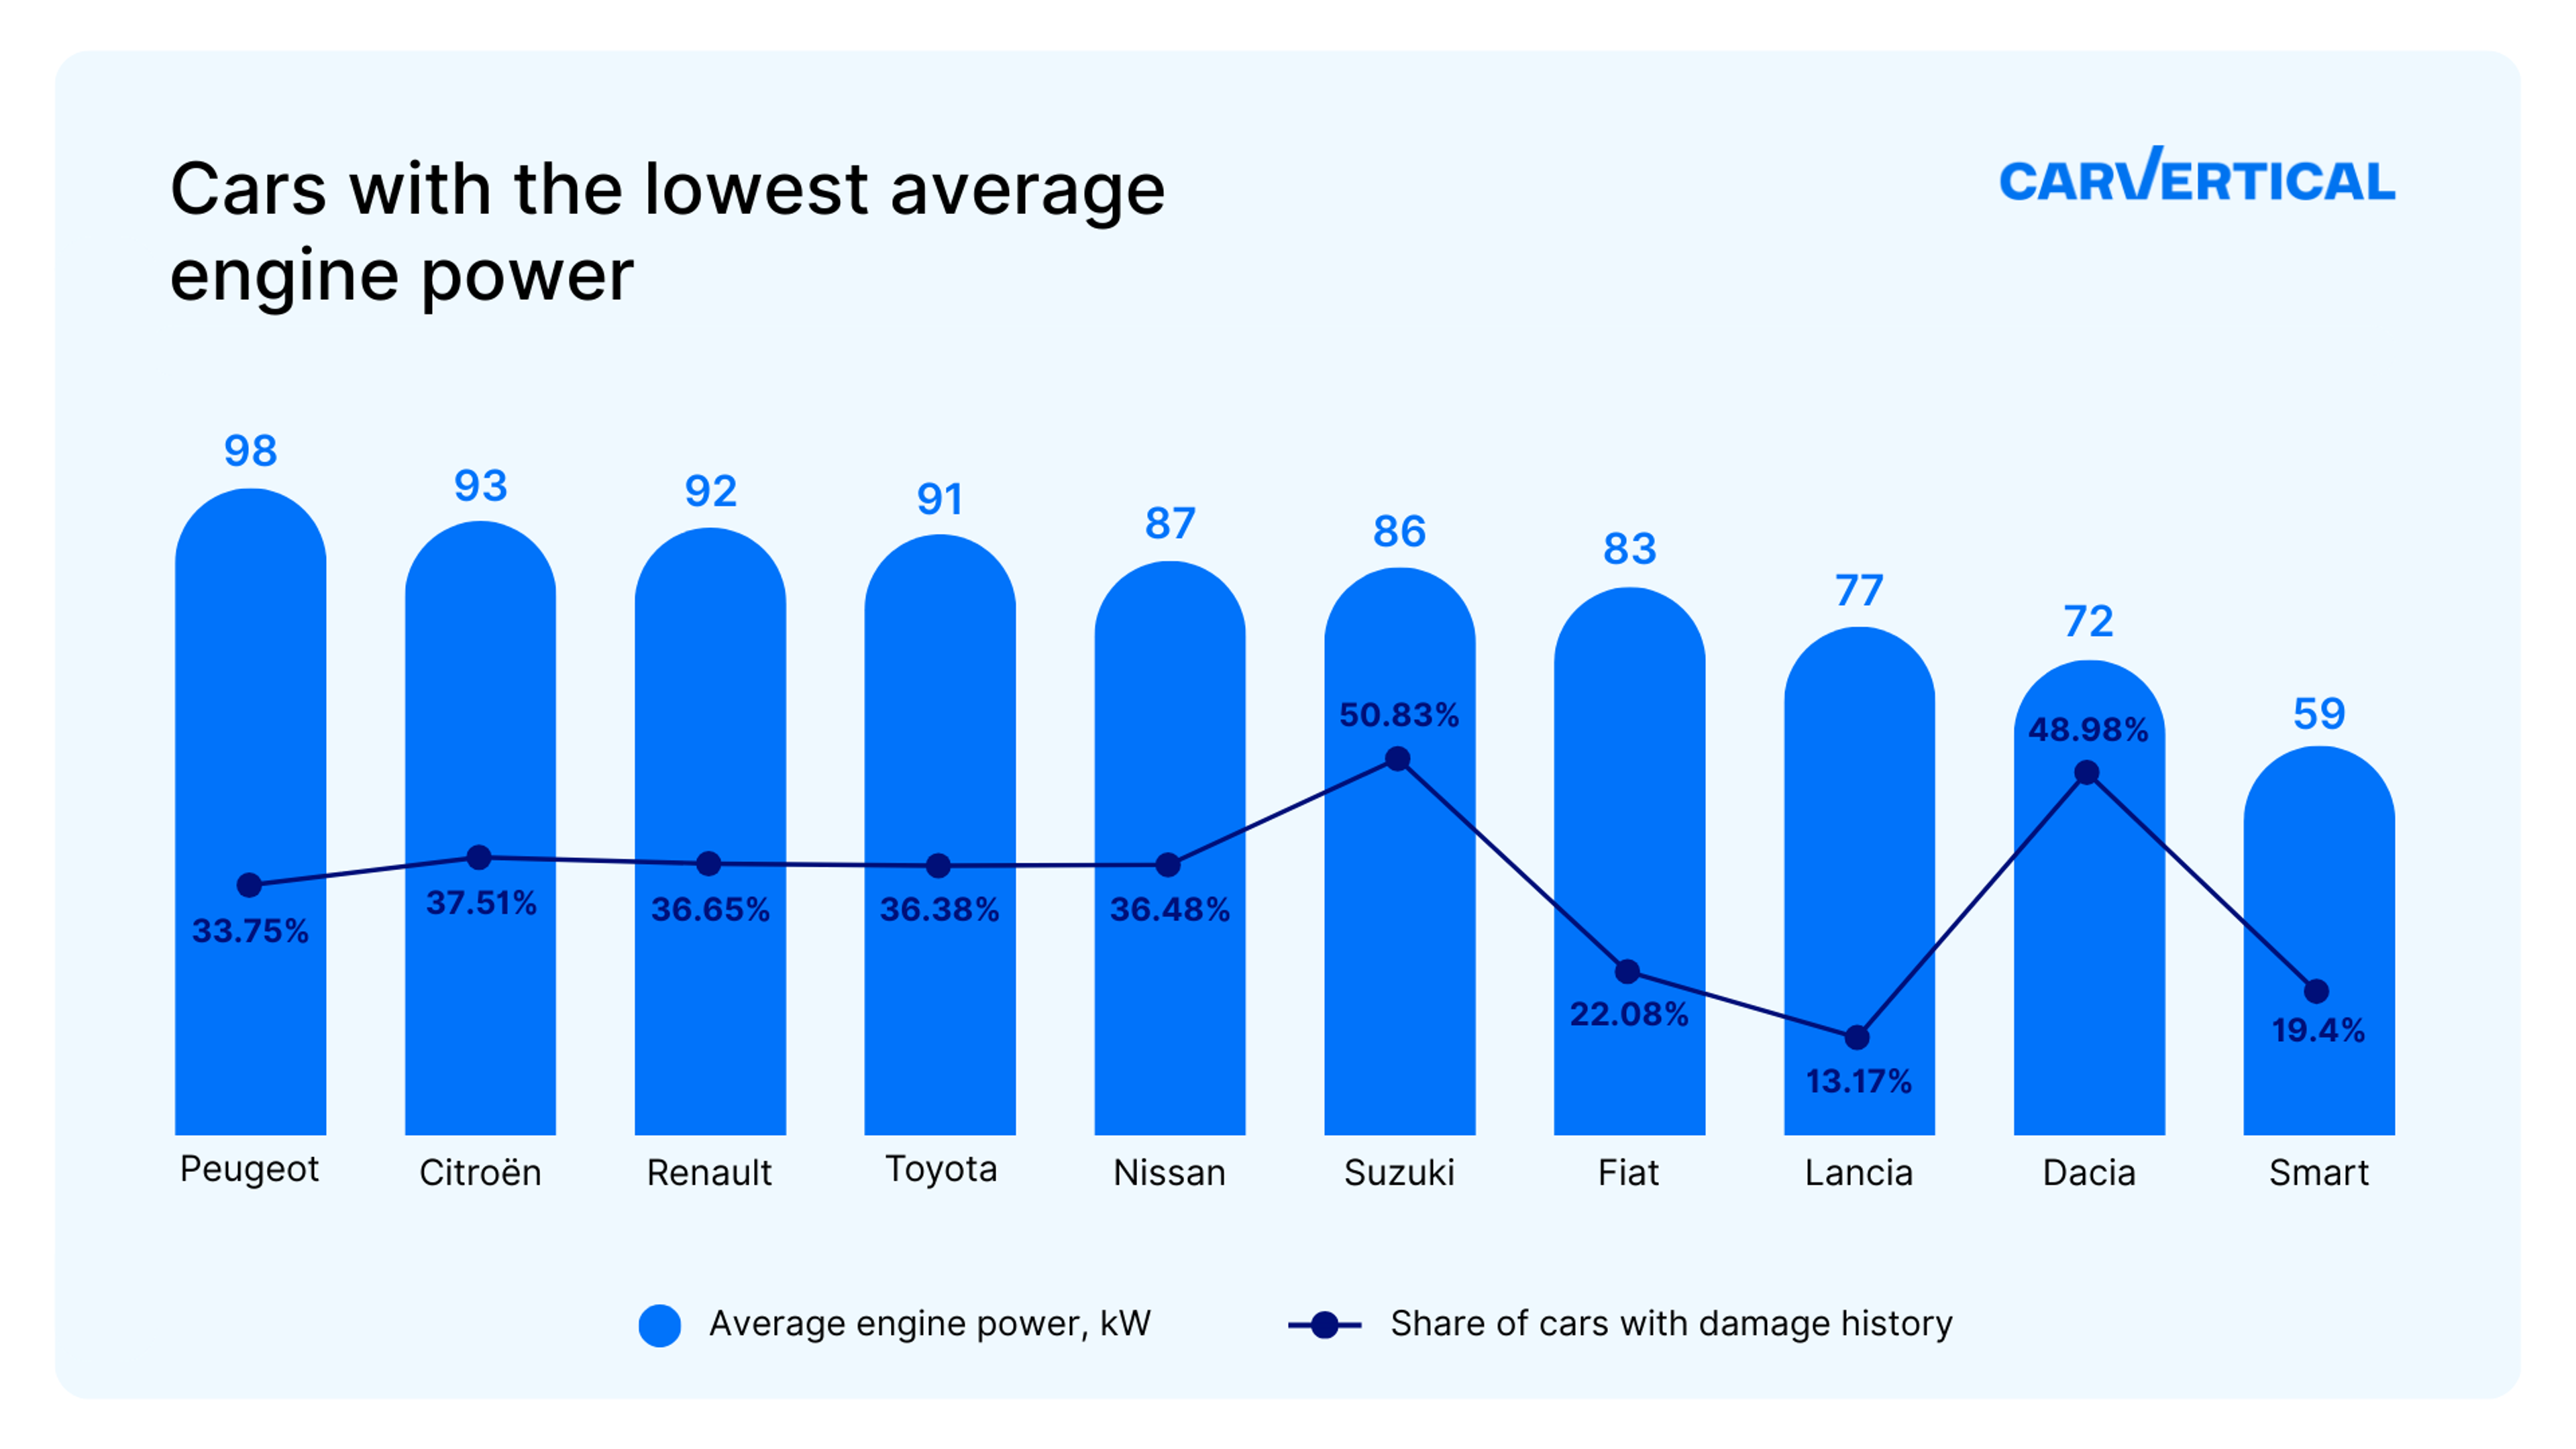 Cars with the lowest average engine power vs damage rates